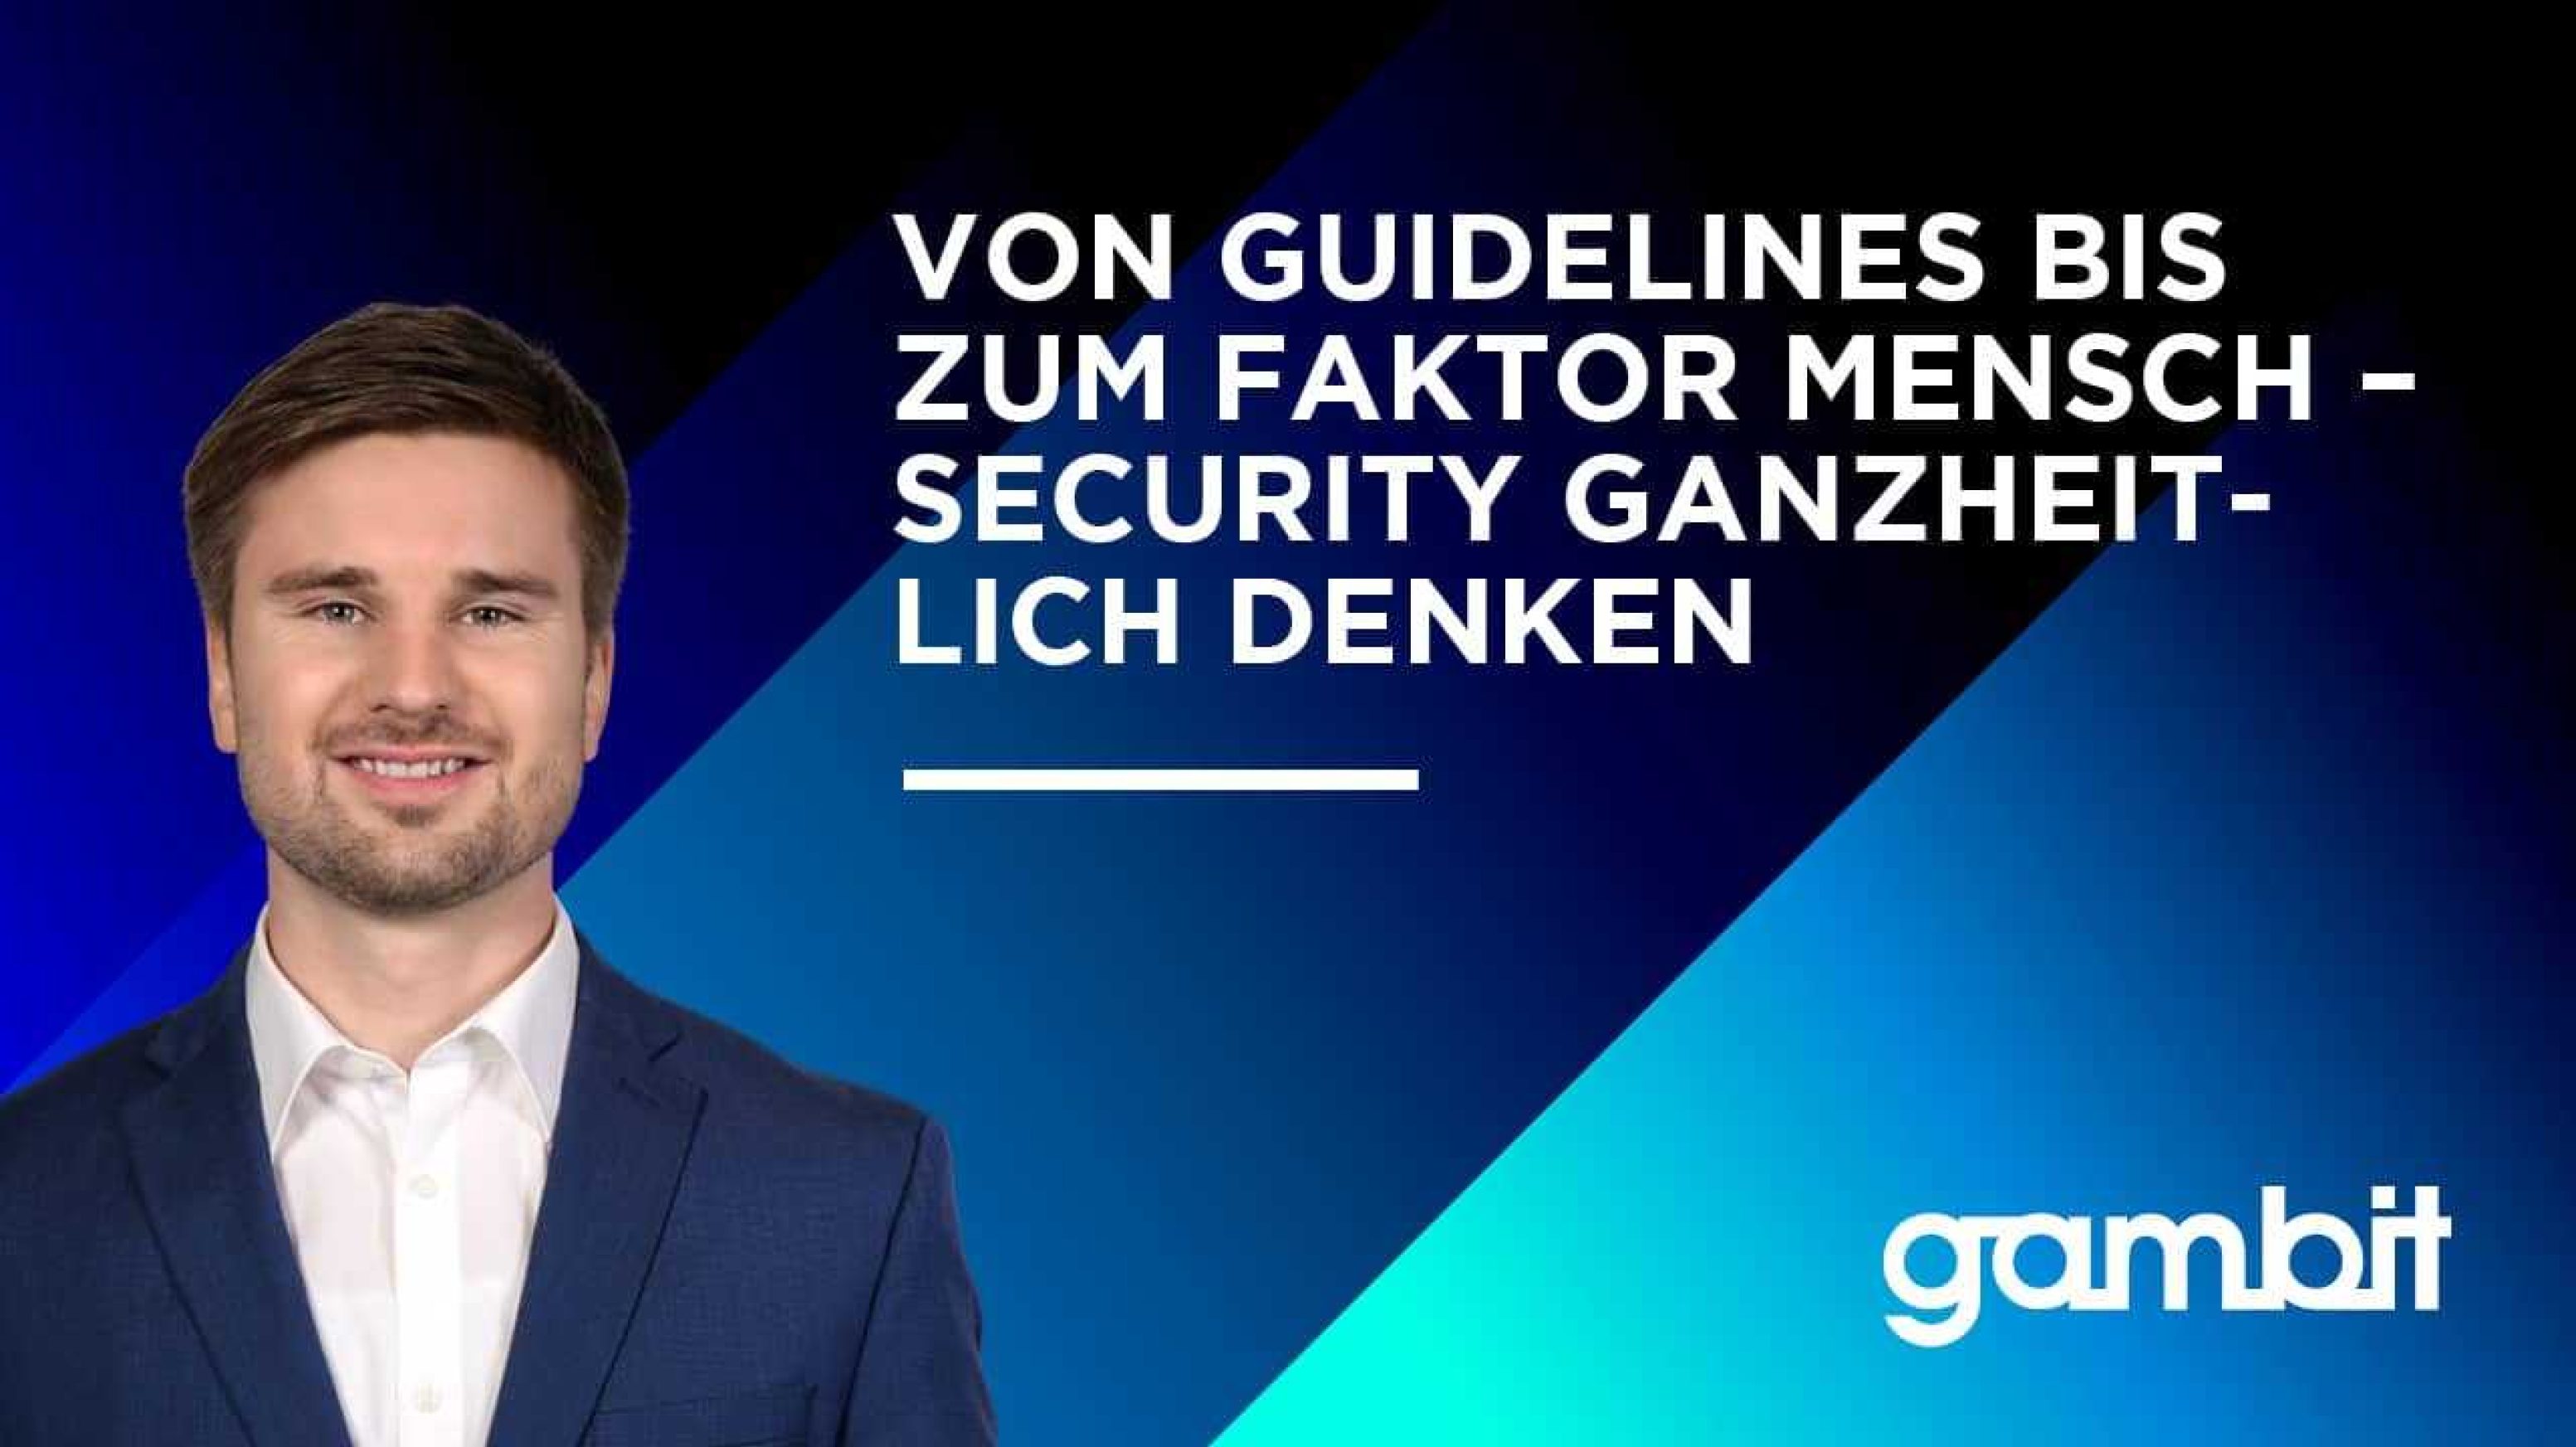 Thumbnail cyber security guidelines bis faktor mensch